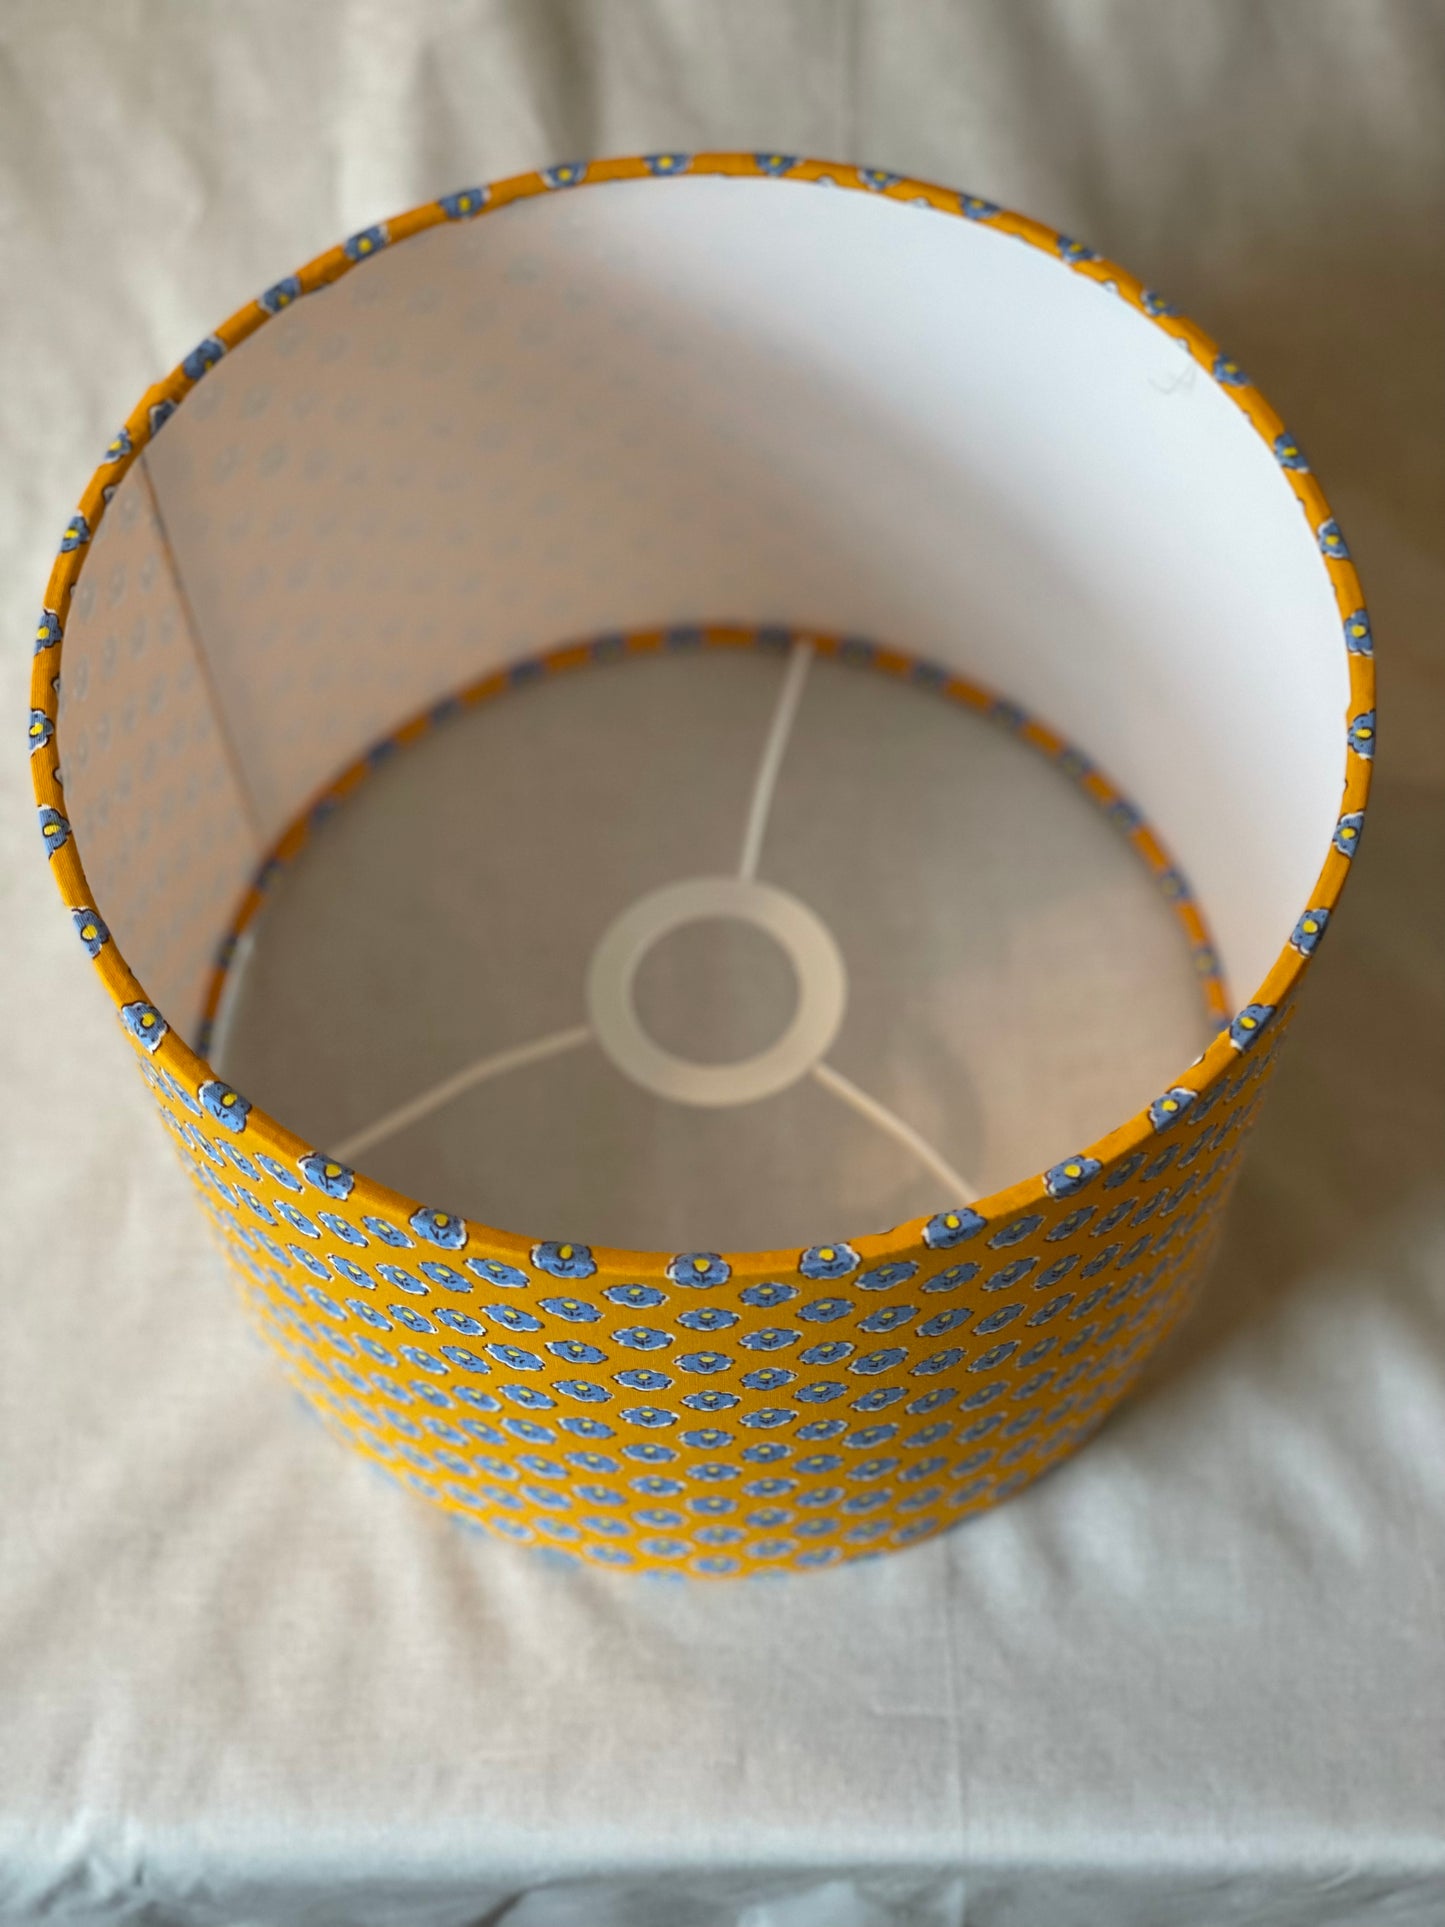 10 inch Drum Lampshade. Vintage French Fabric. Mustardy Yellow with French Blue and Pale Yellow Floral Motif.